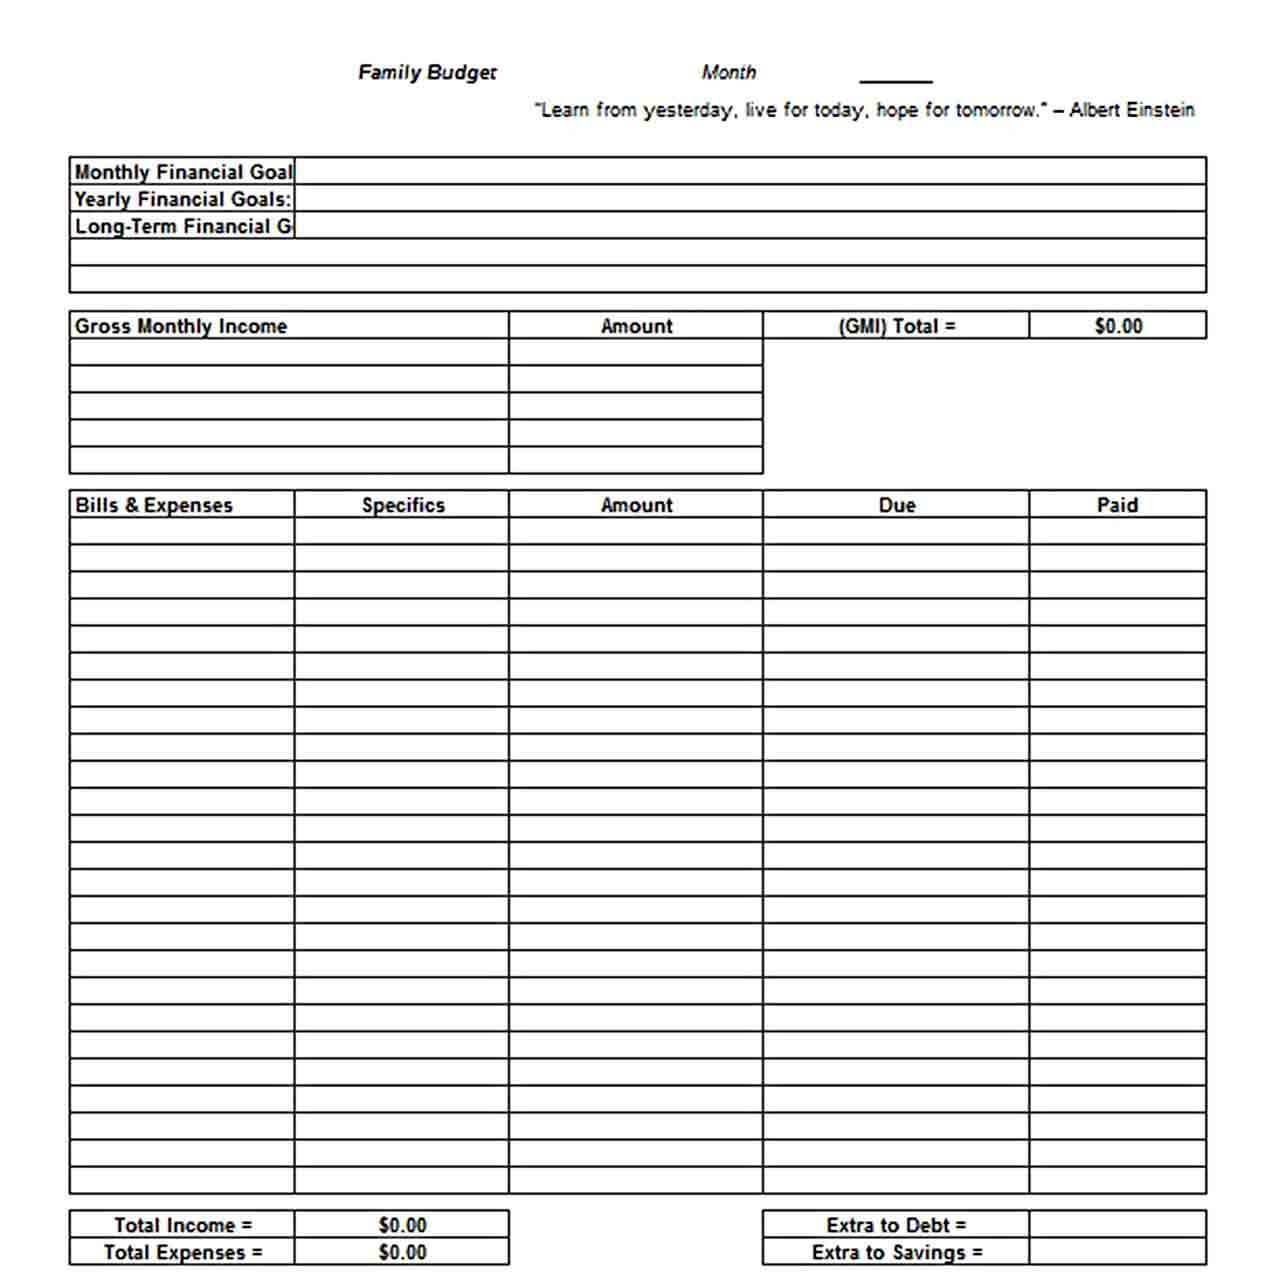 Family Budget Template Excel 1